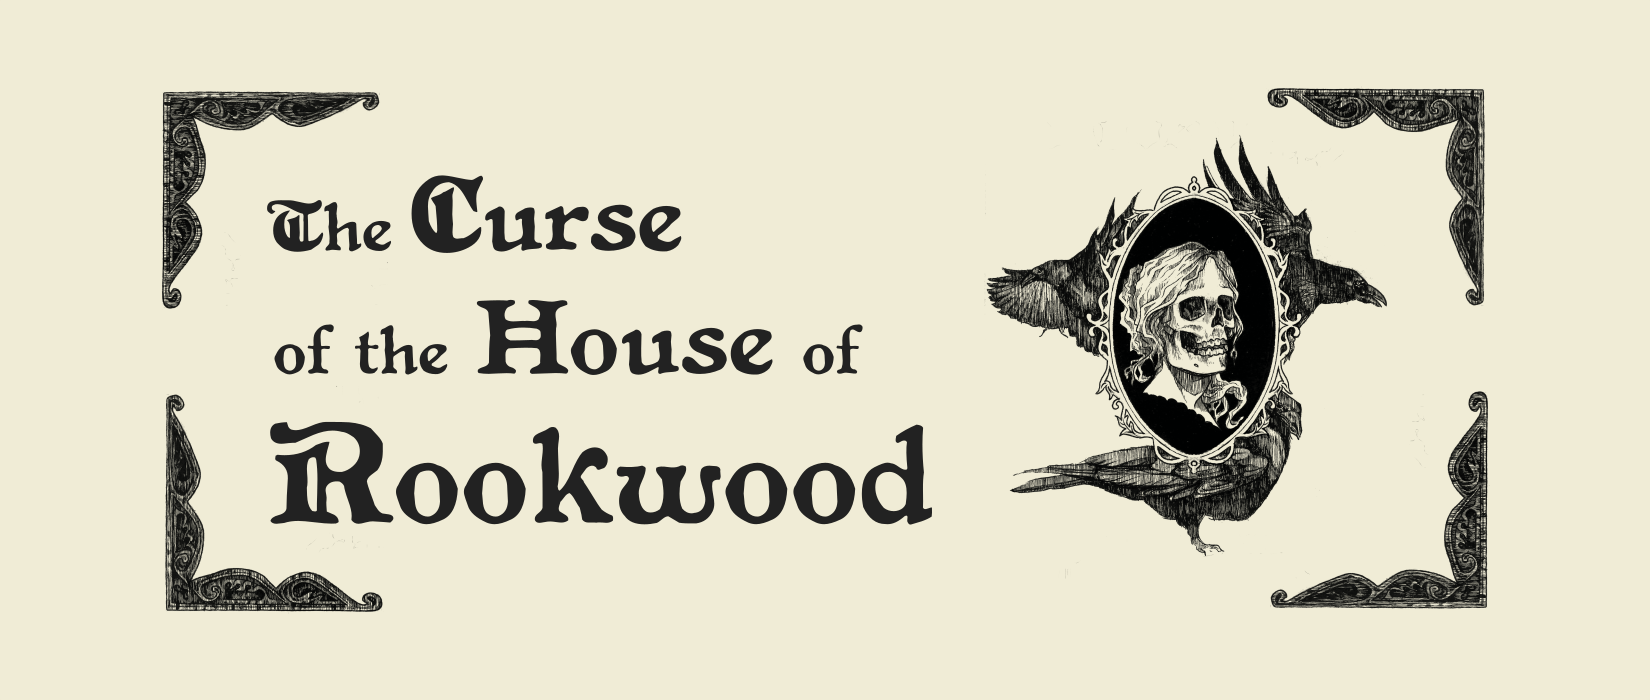 The Curse of the House of Rockwood